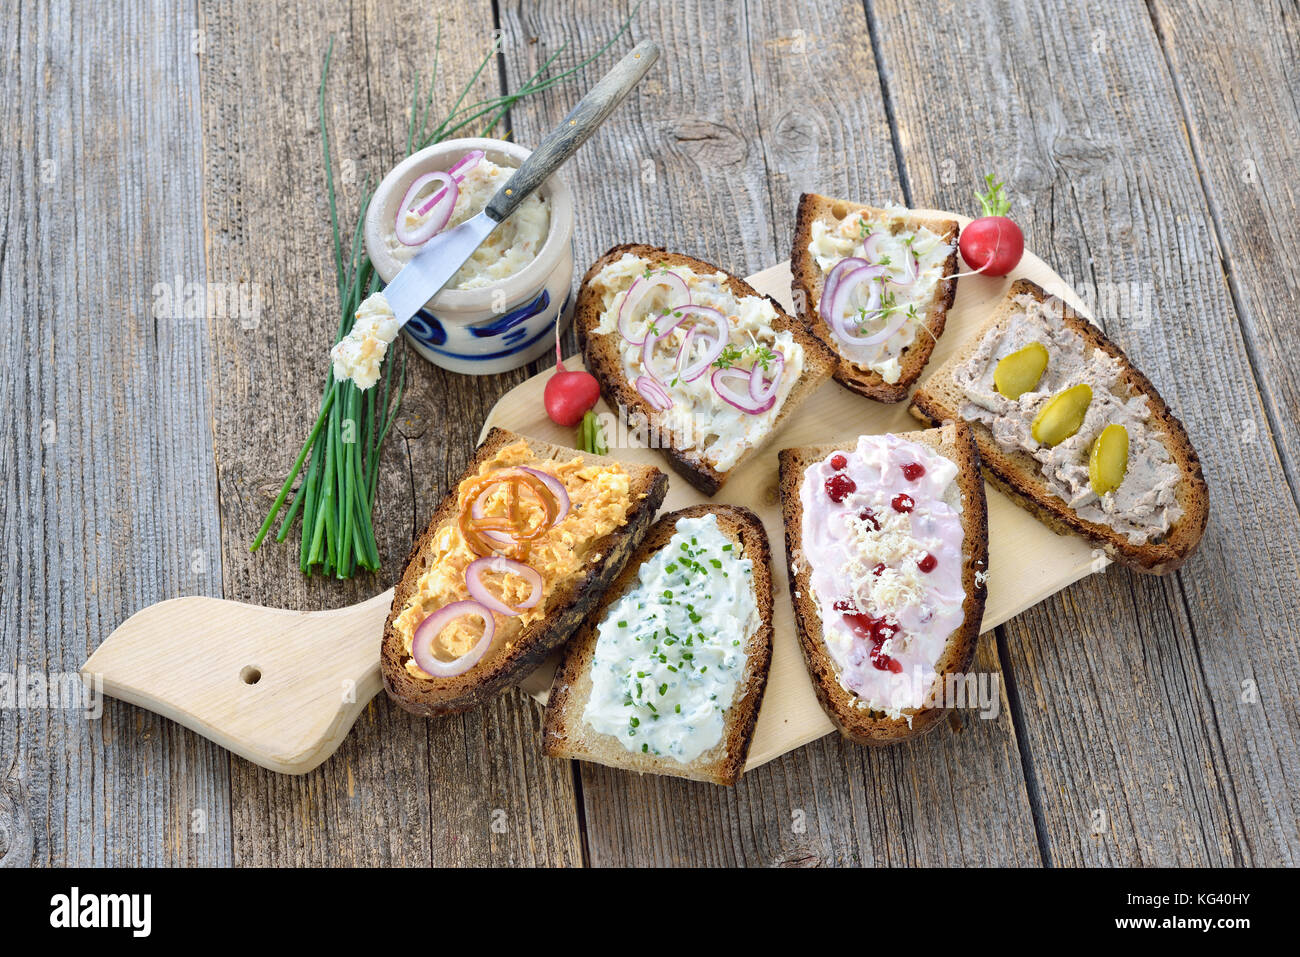 Hearty snack with different kinds of spreads on farmhouse bread served on an old wooden table Stock Photo